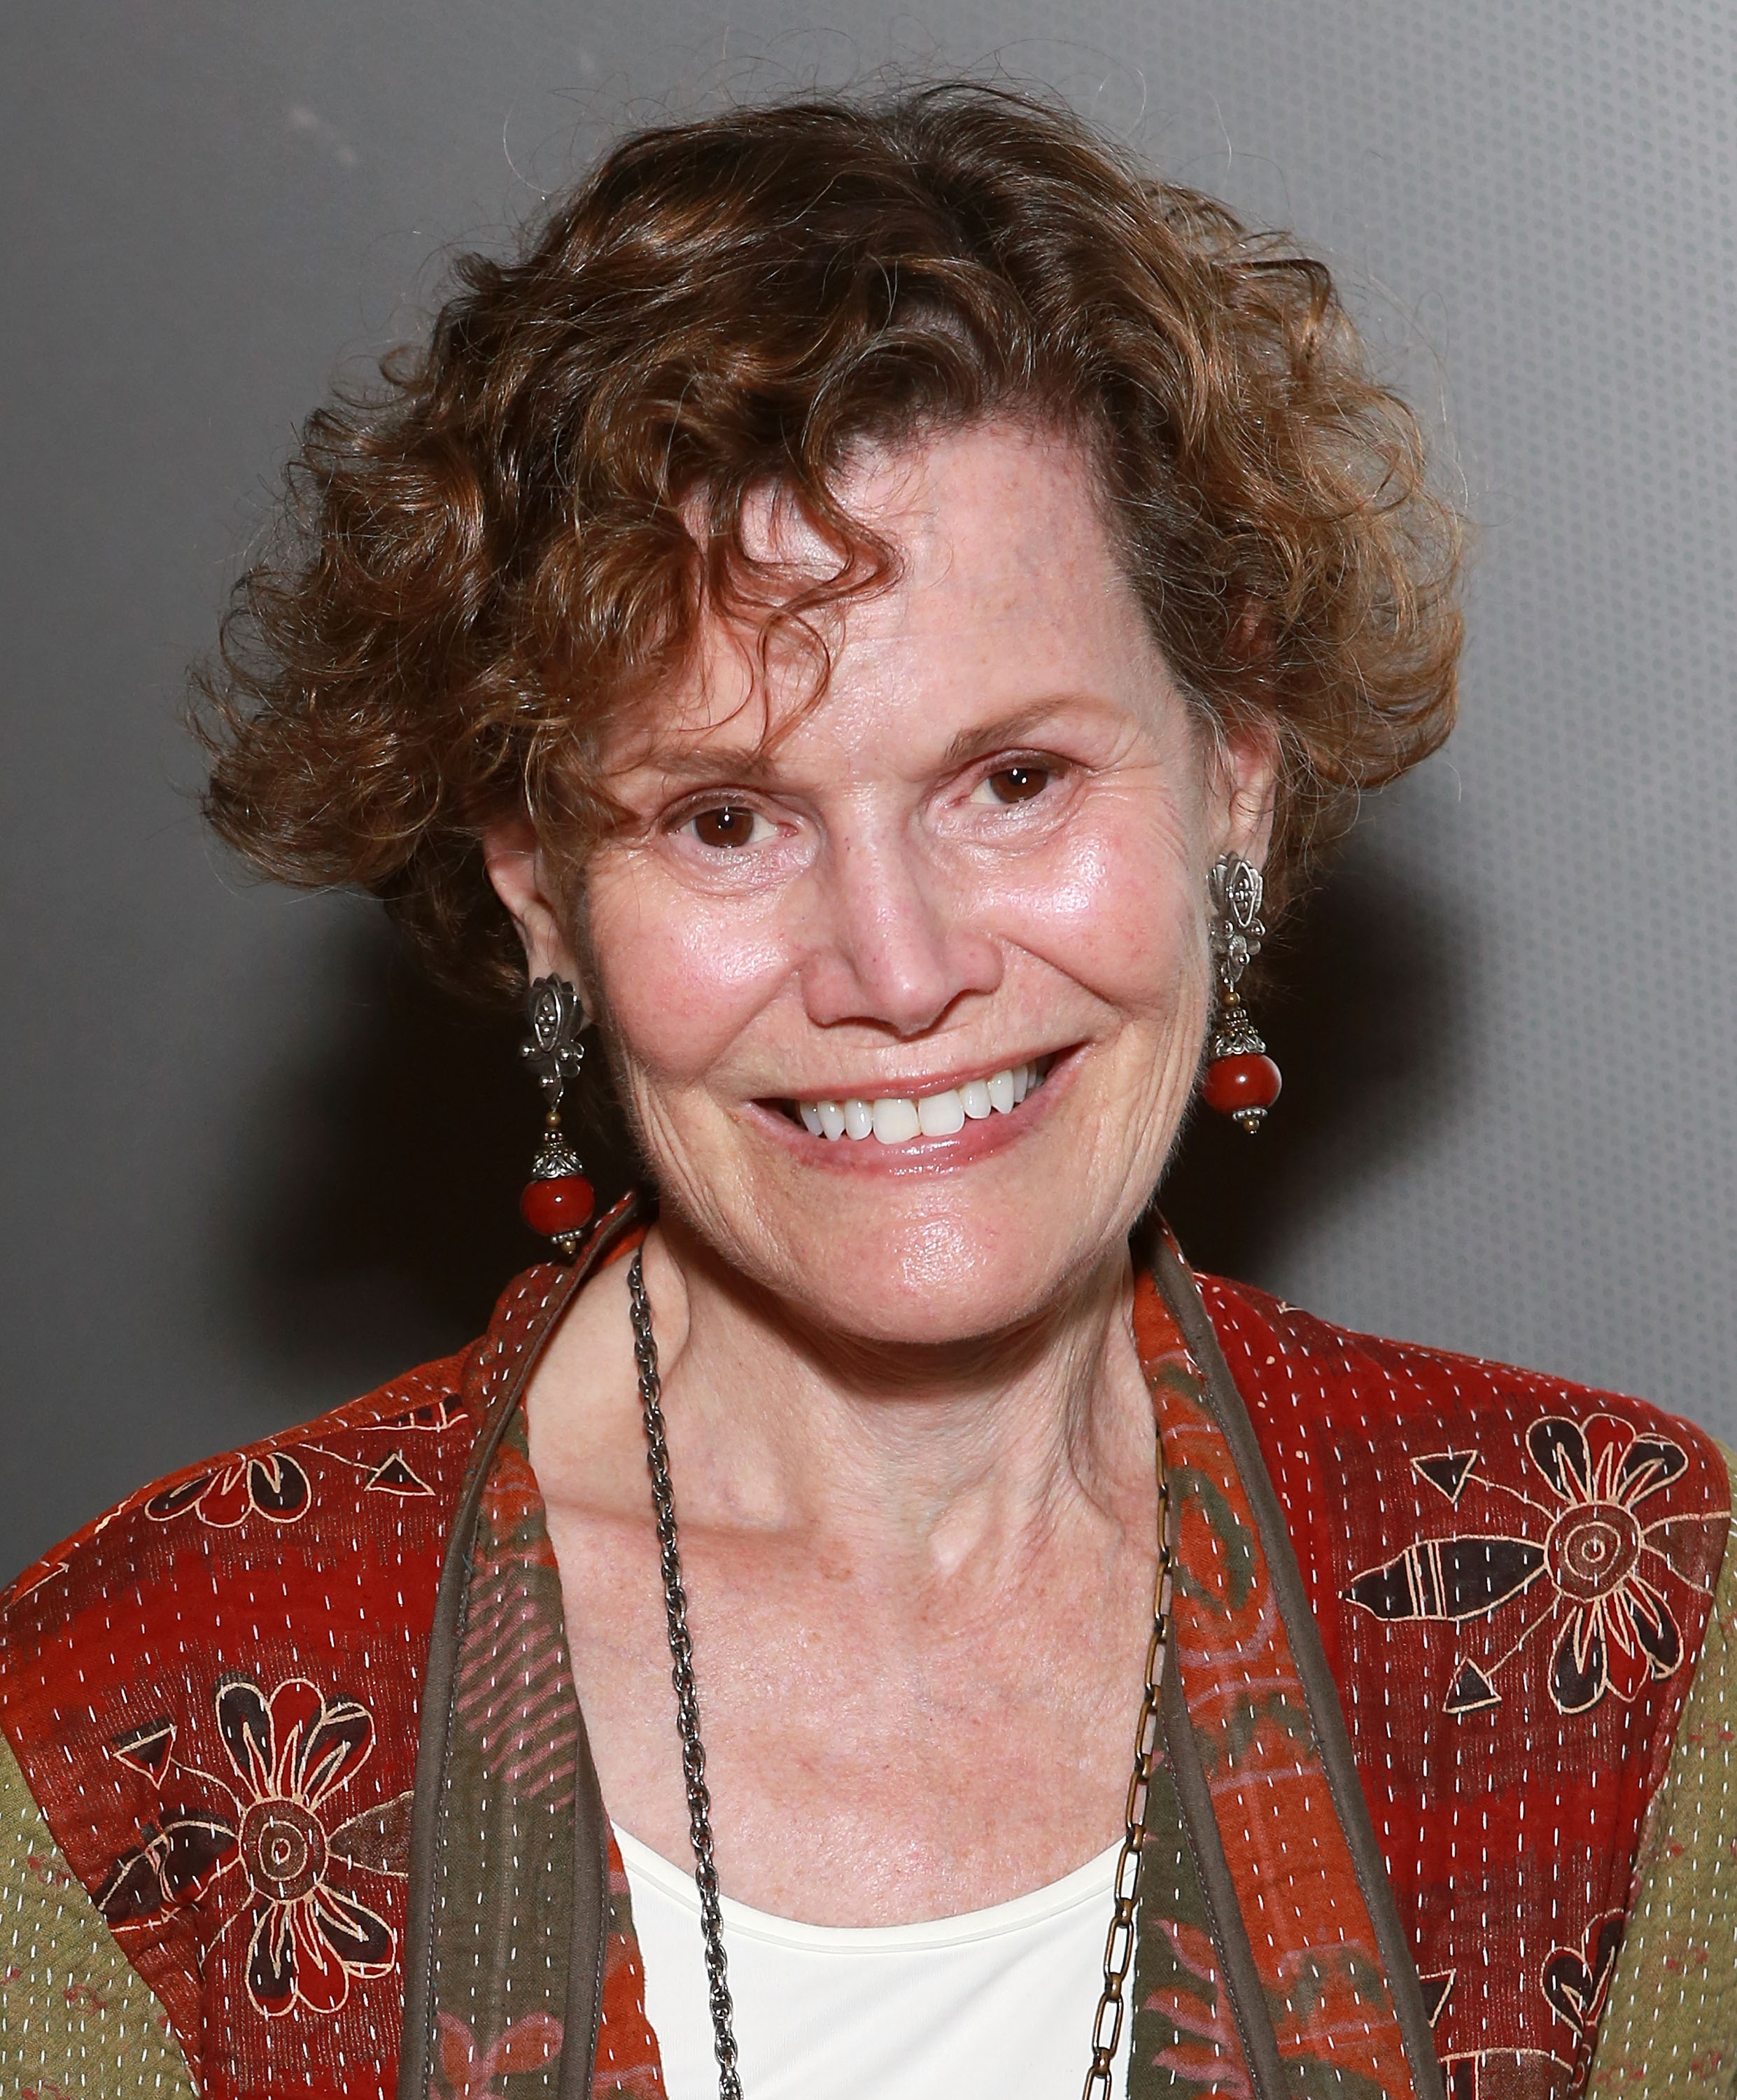 Author and producer Judy Blume attends 